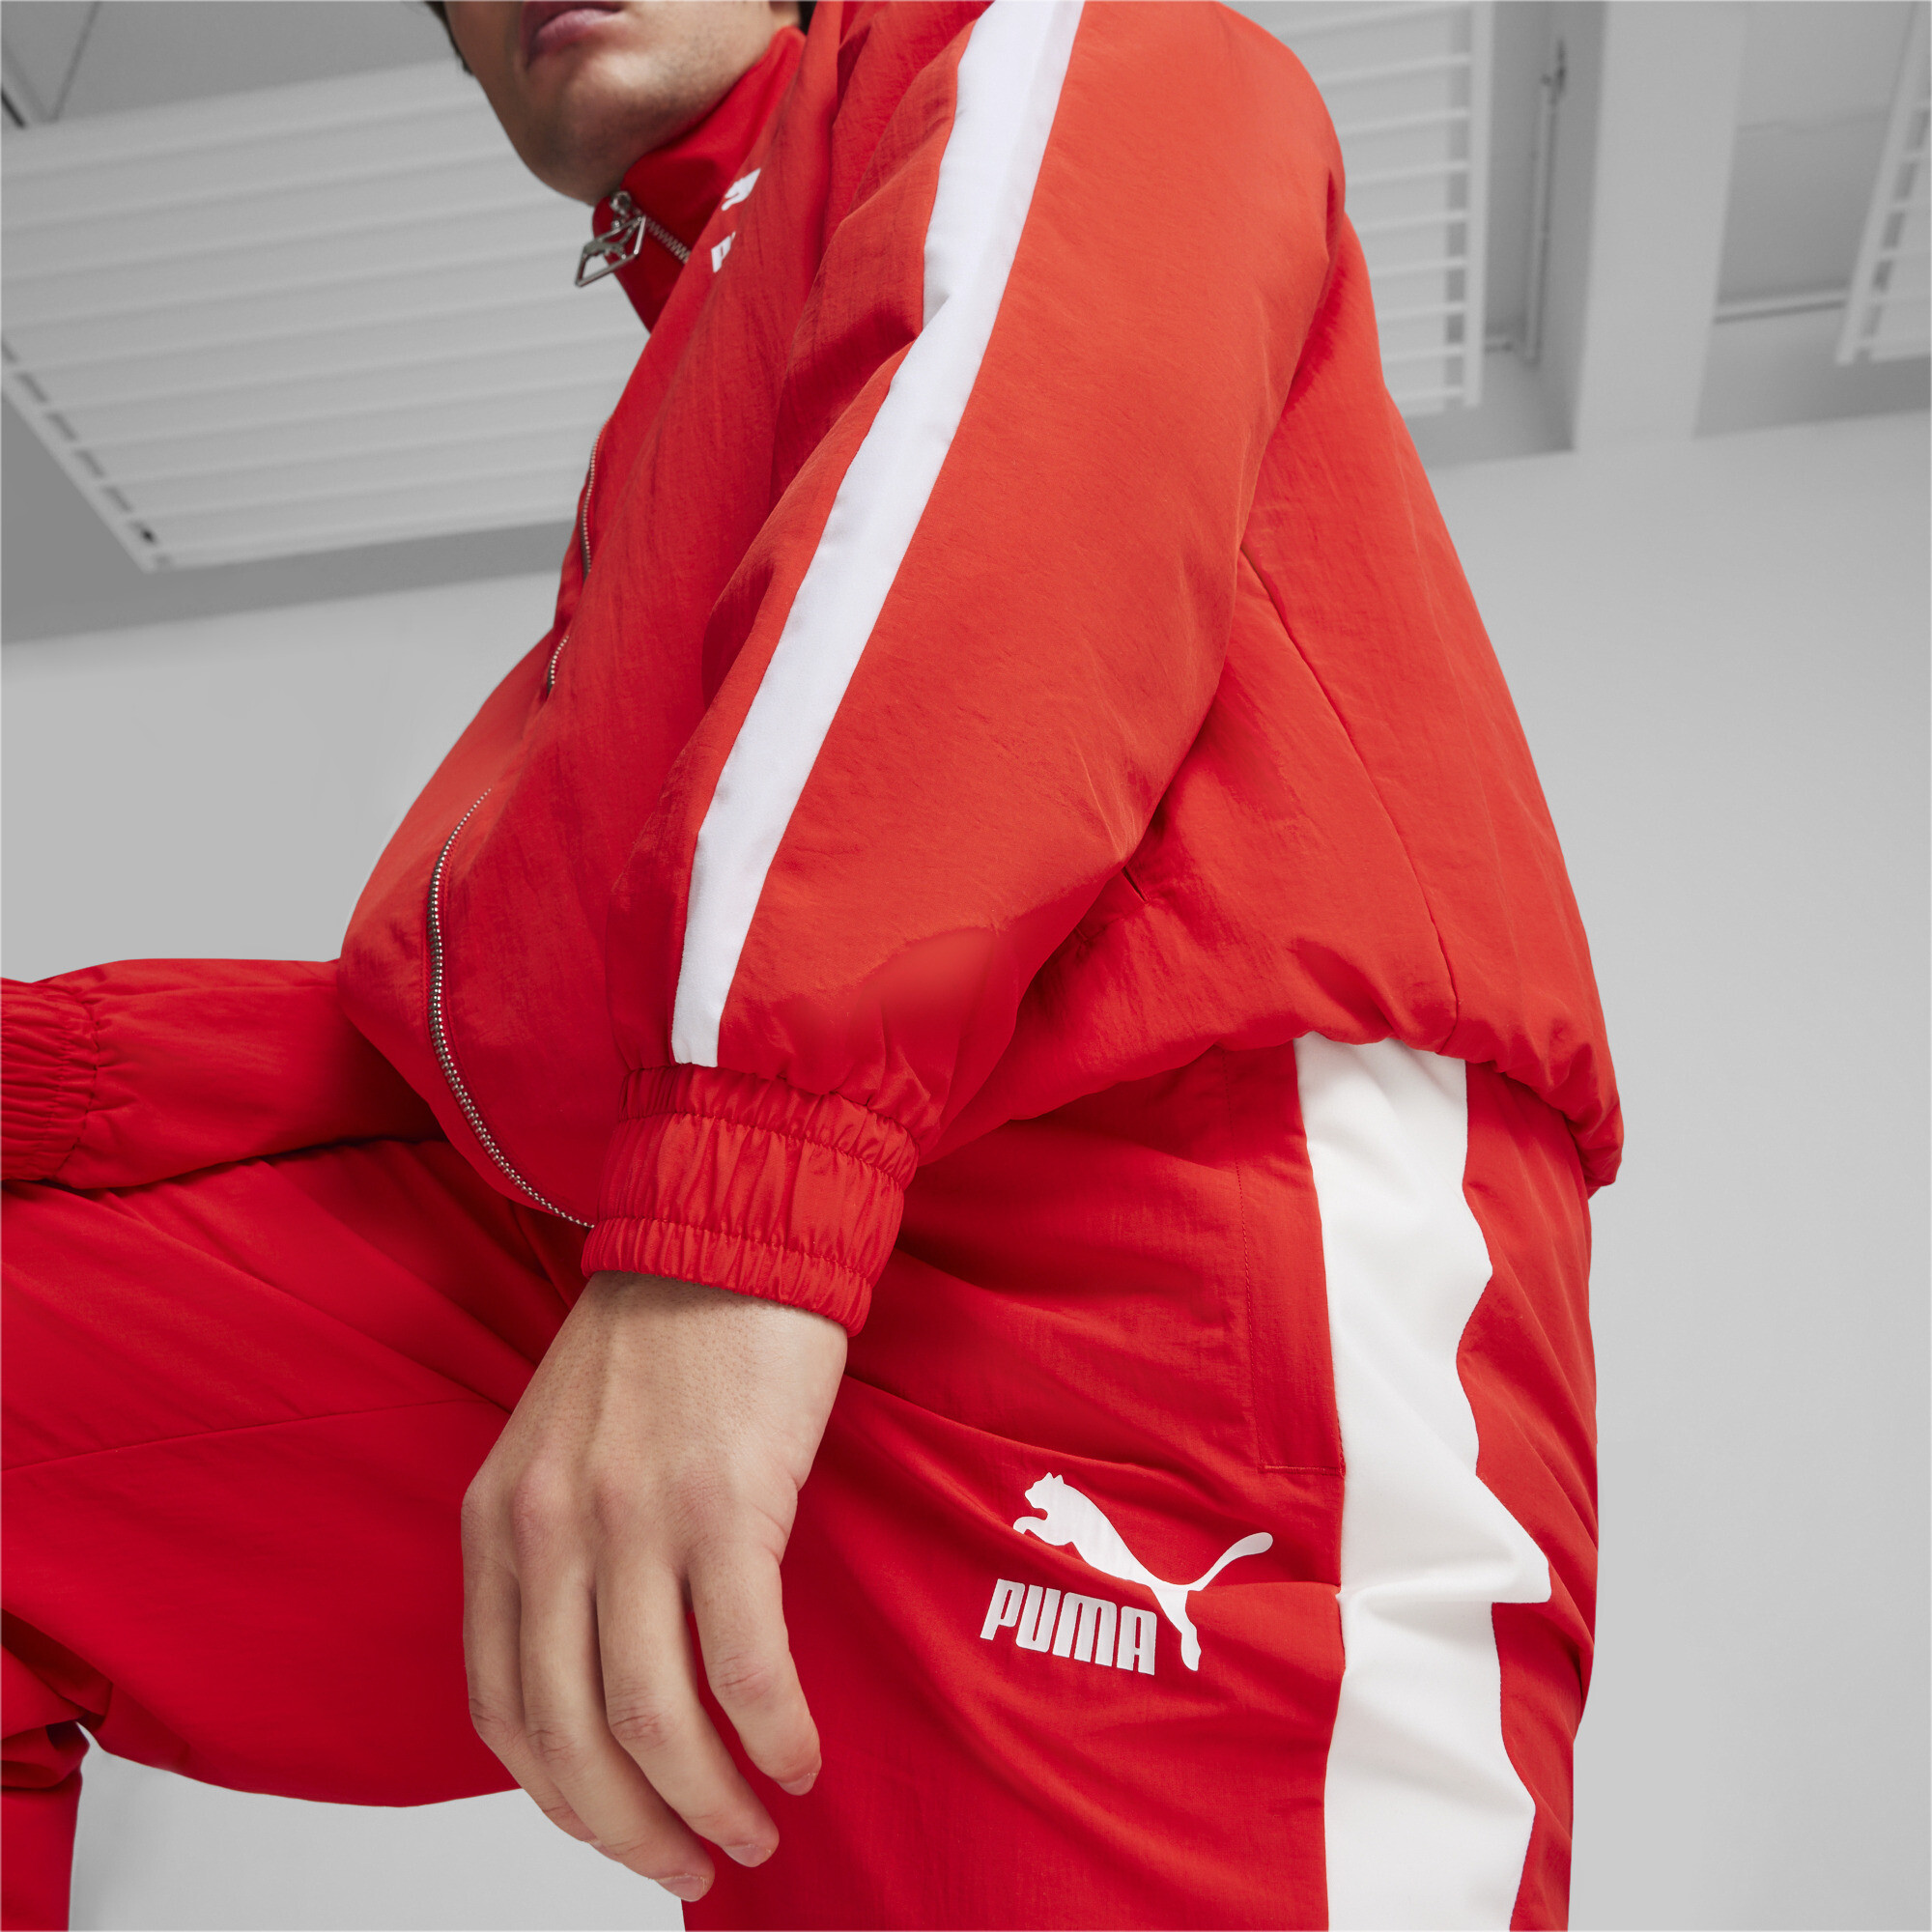 Puma T7's Oversized Track Pants, Red, Size M, Women